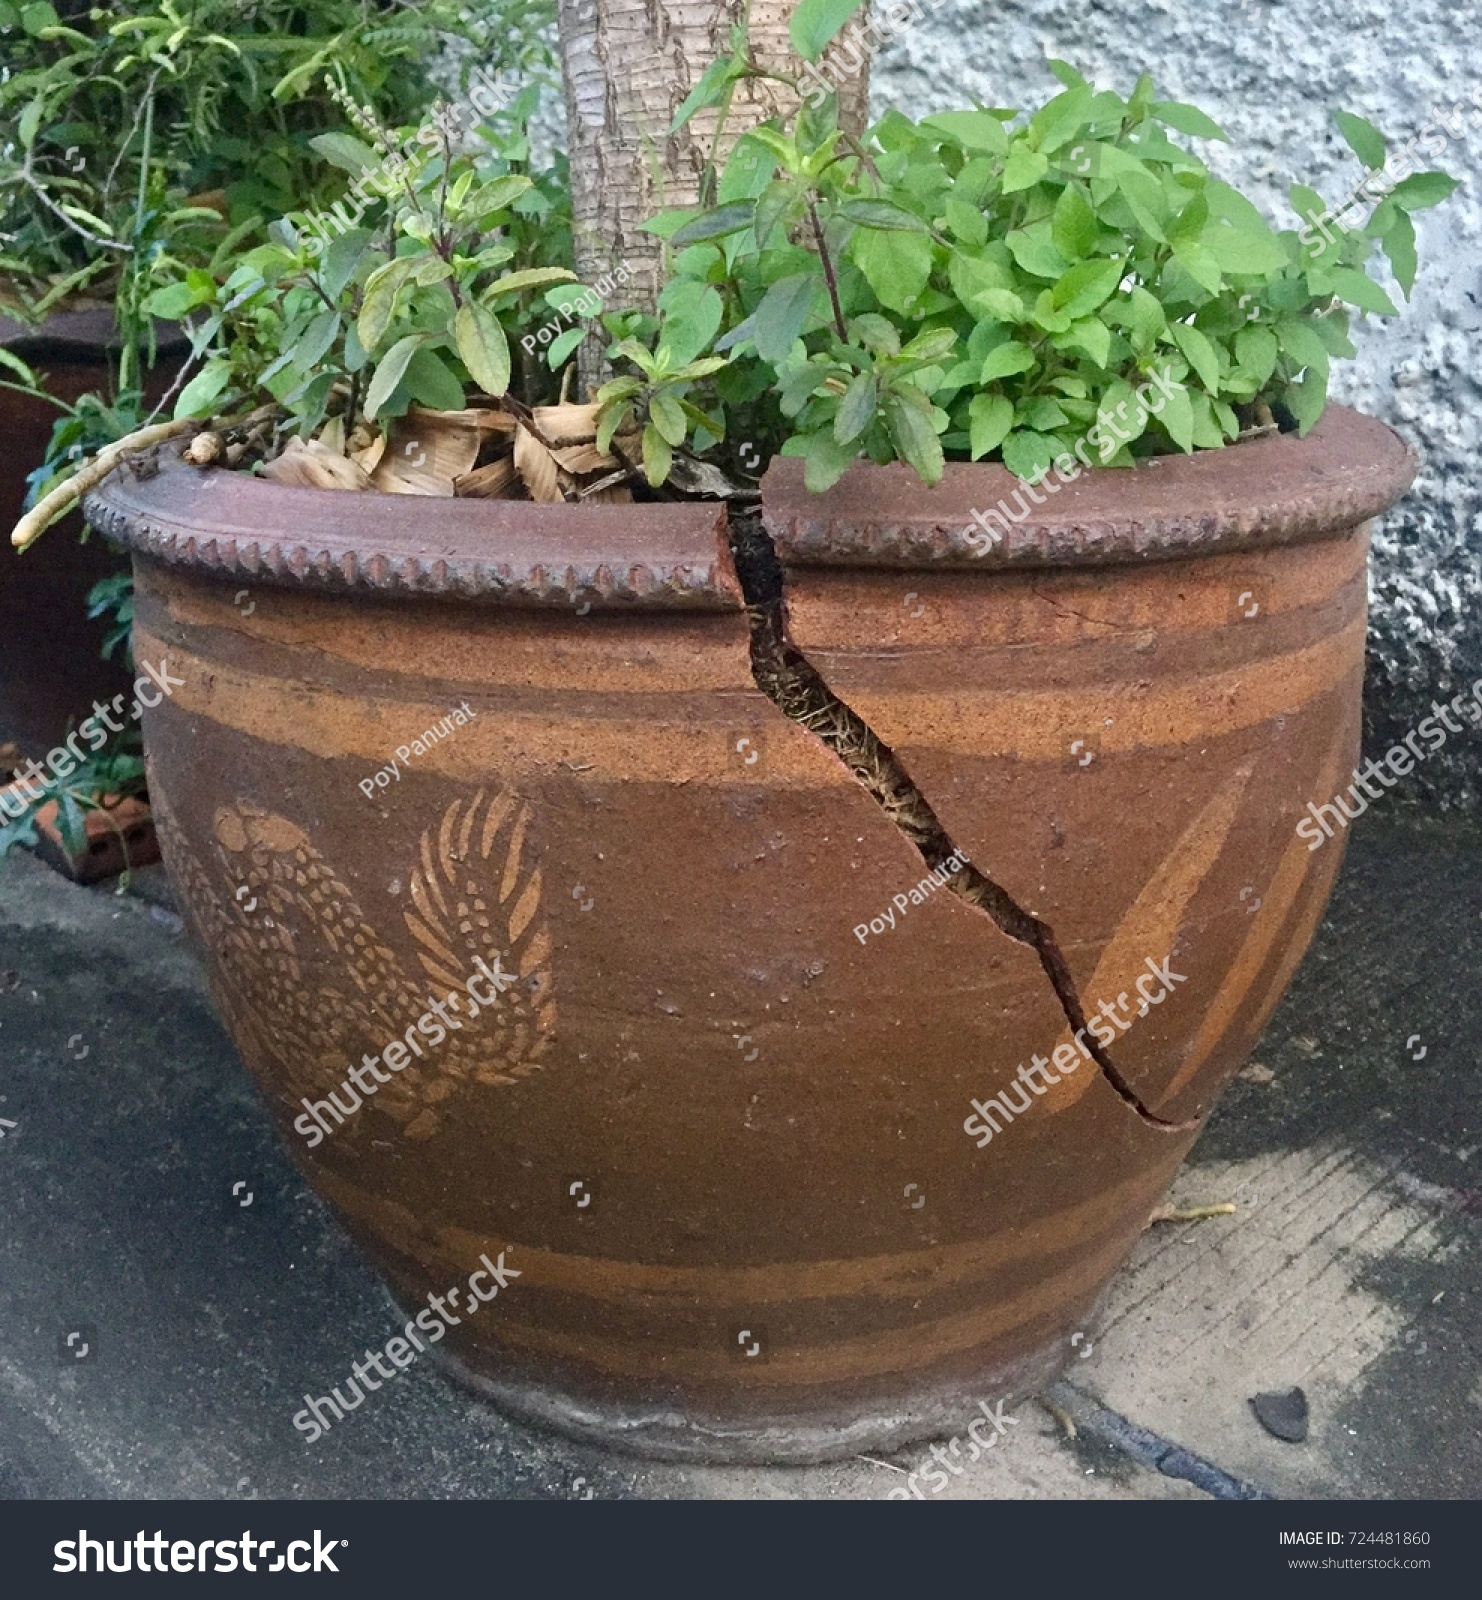 The Pot is Broken Because the Plants and the Tree inside Grow Faster and Over Size. #724481860